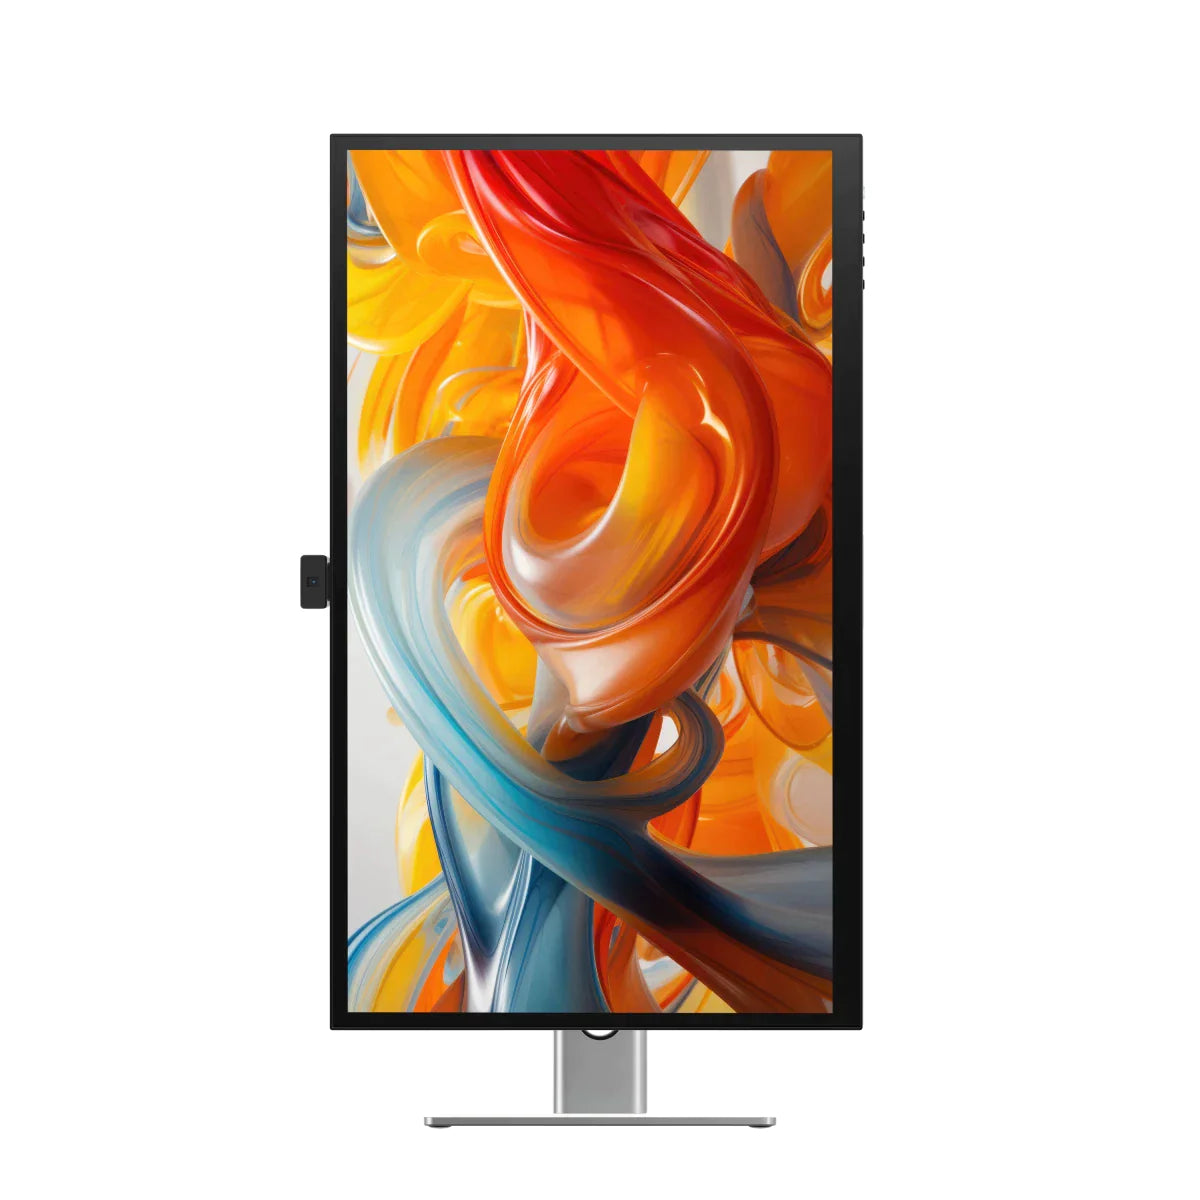 CLARITY 27" UHD 4K Monitor + Clarity Pro Touch 27" UHD 4K Monitor with 65W PD, Webcam and Touchscreen + Thunderbolt 4 BLAZE Docking Station